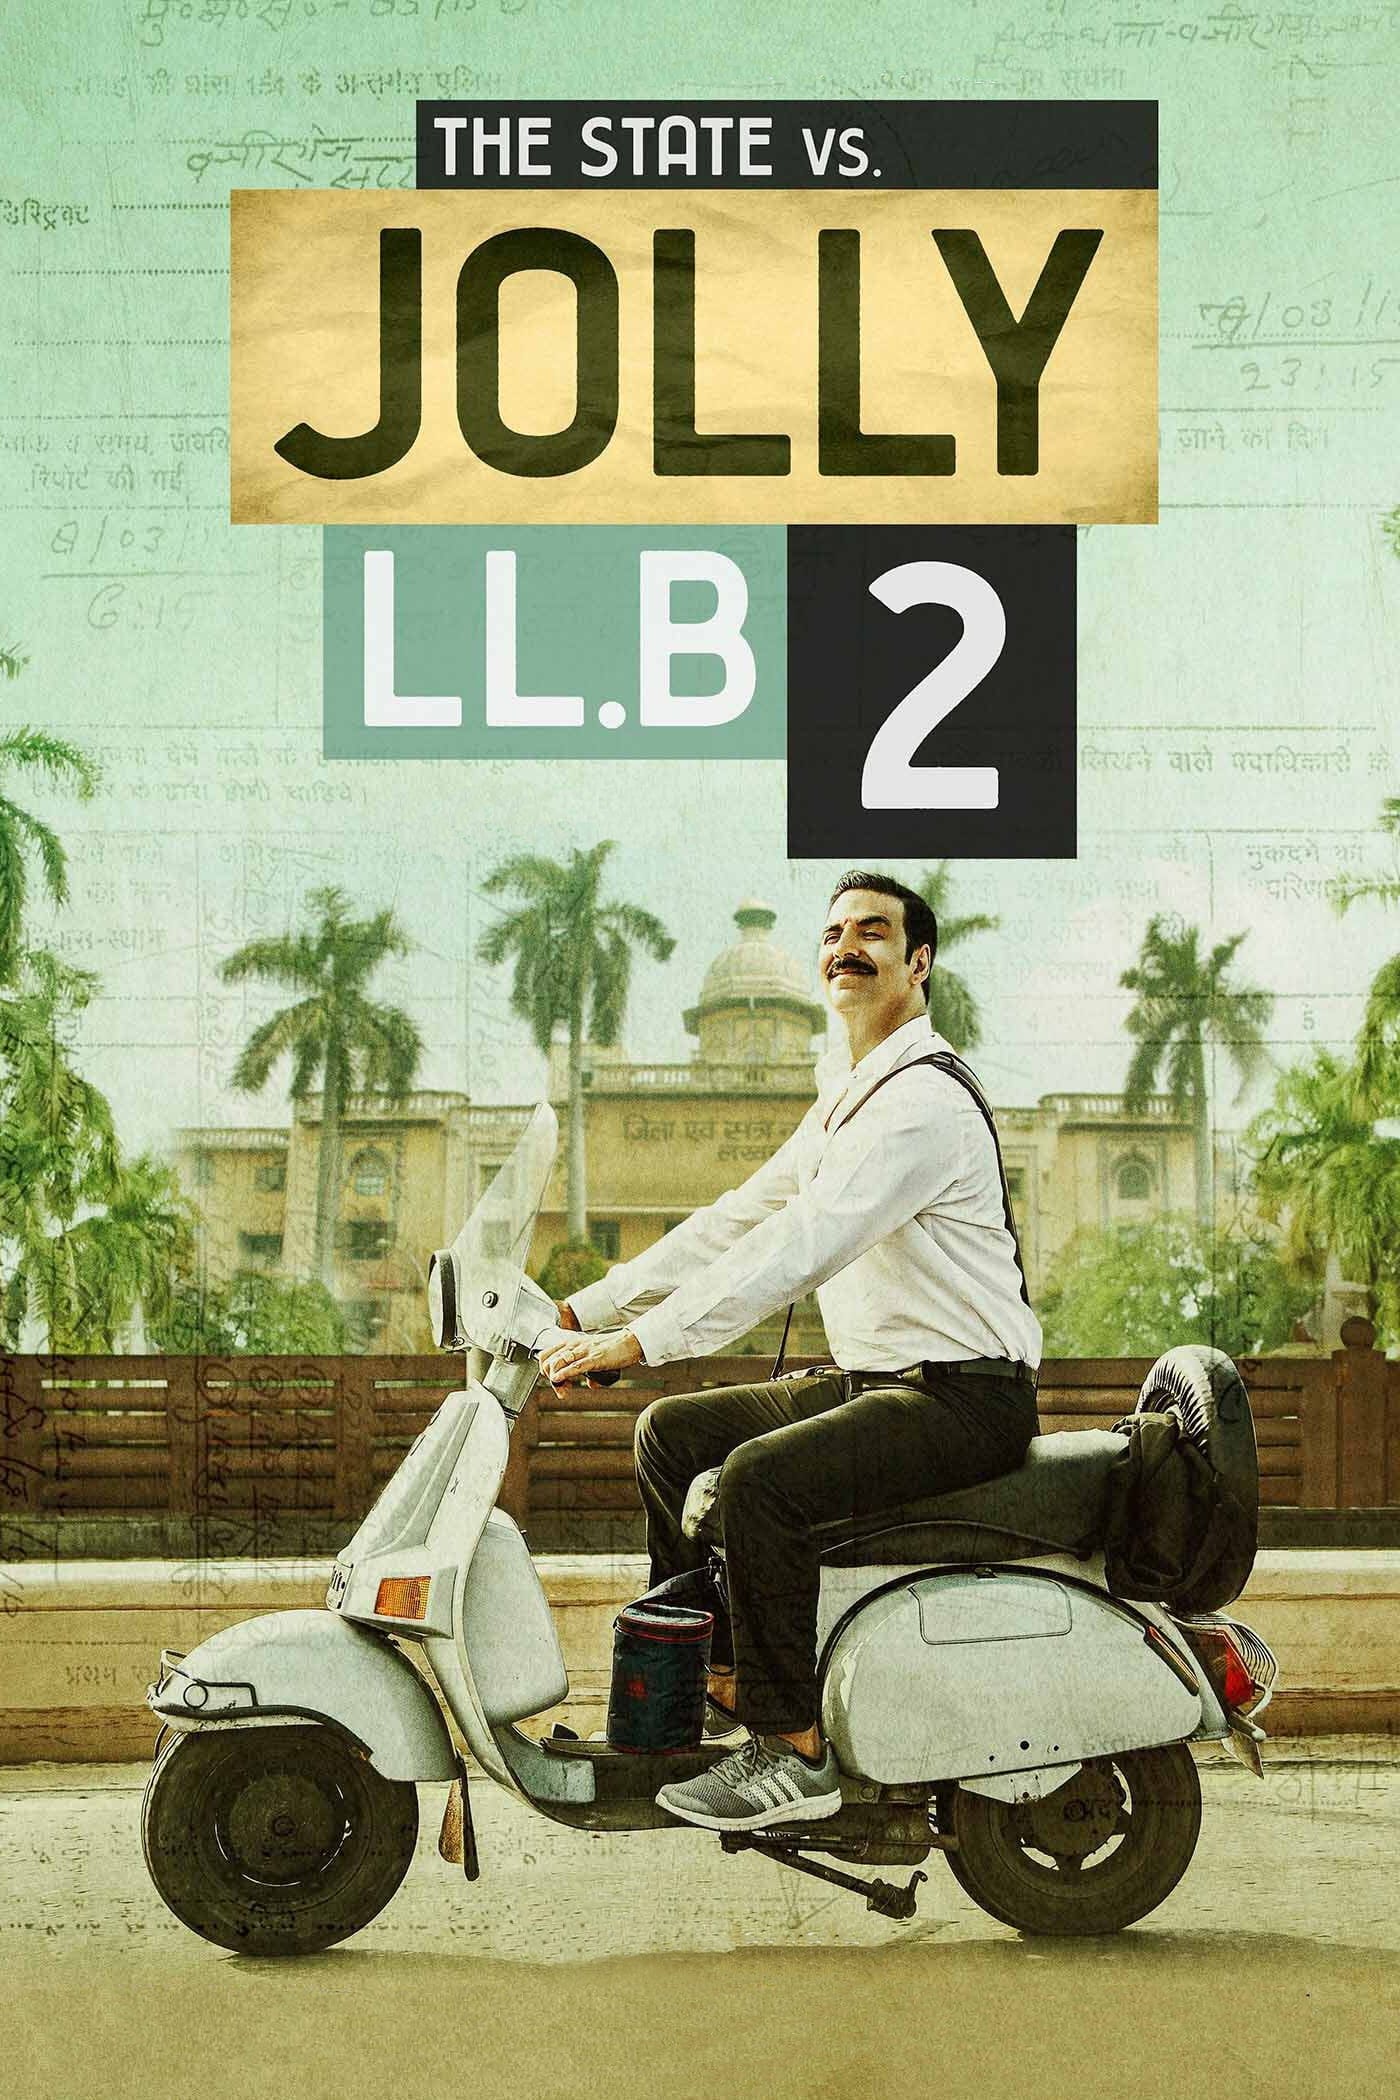 Poster for the movie "Jolly LLB 2"